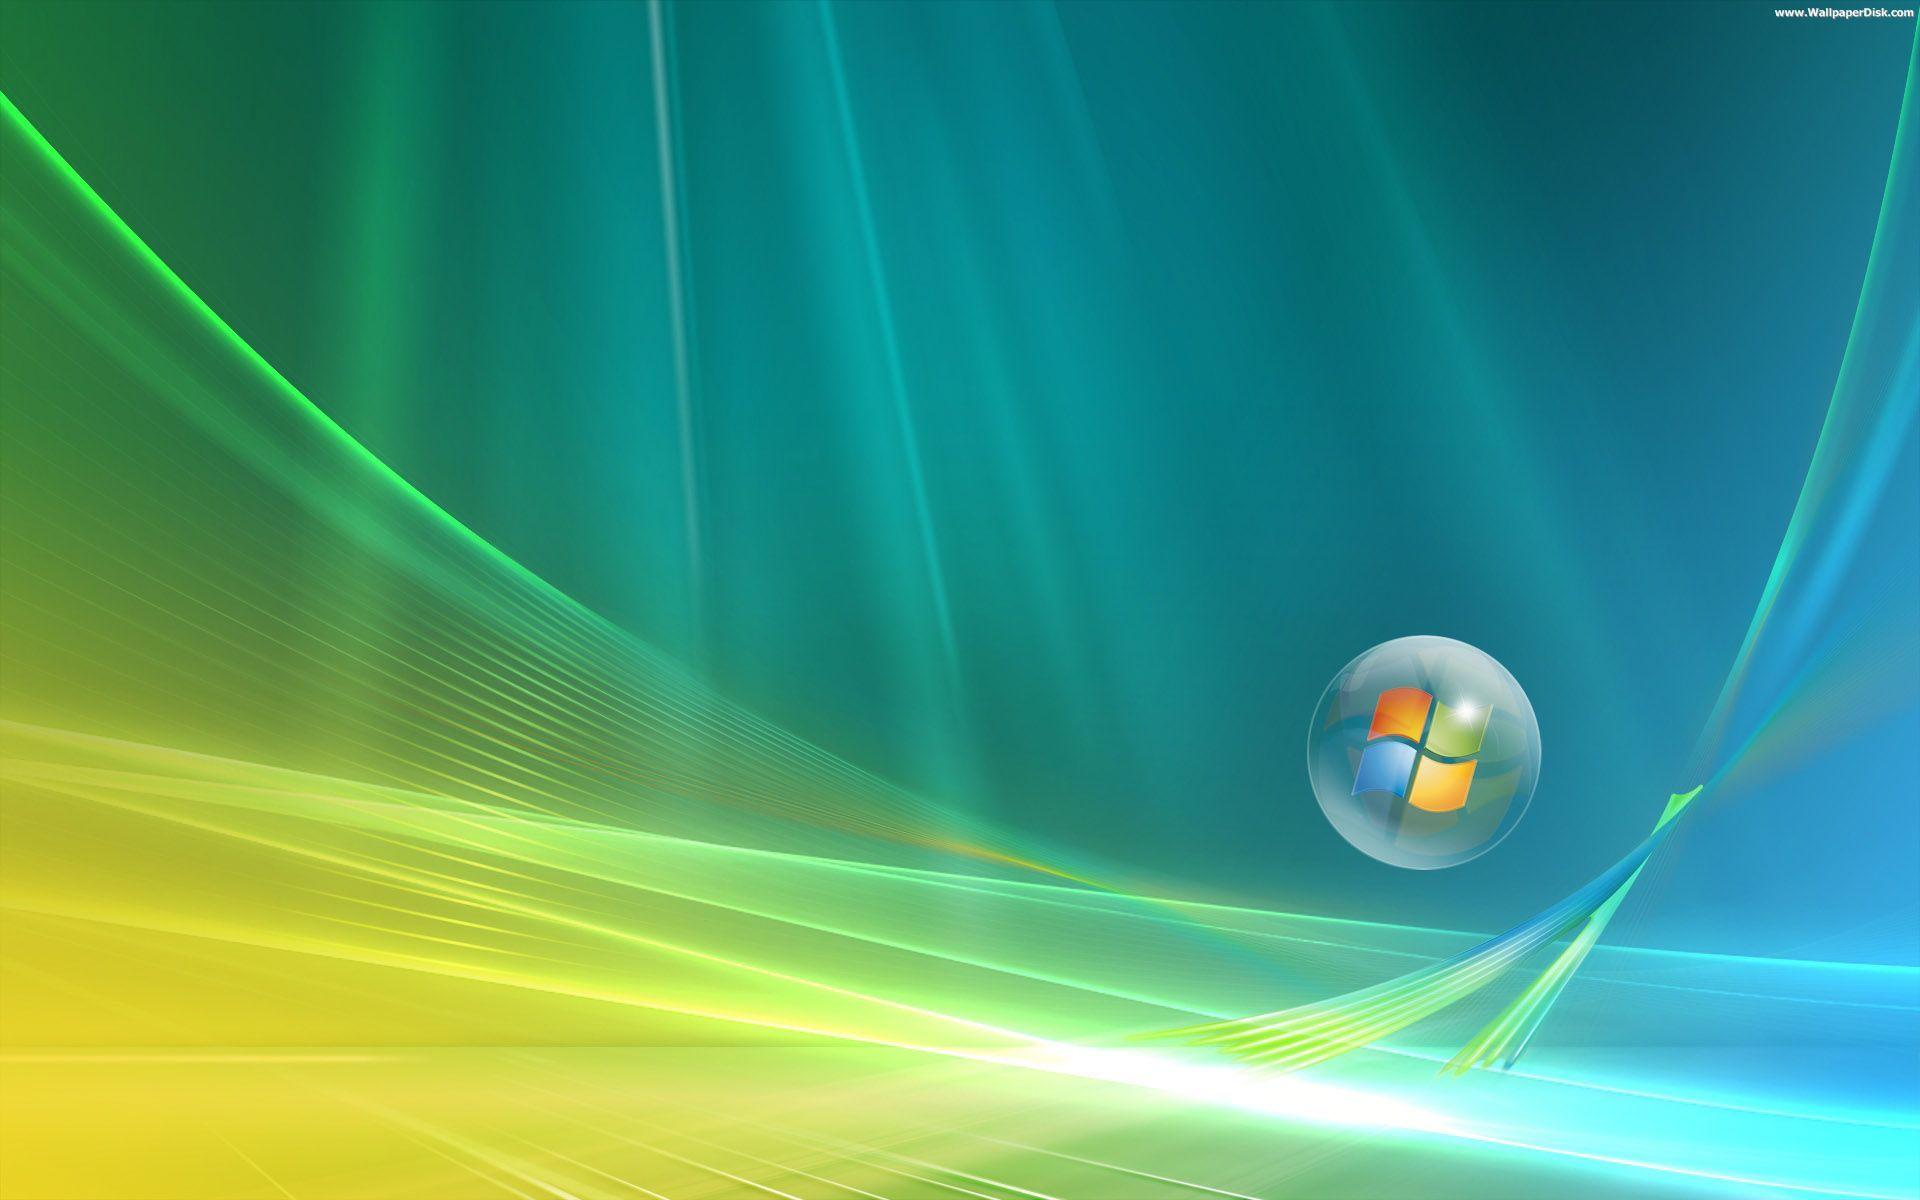 Operating System Wallpapers - Top Free Operating System Backgrounds ...